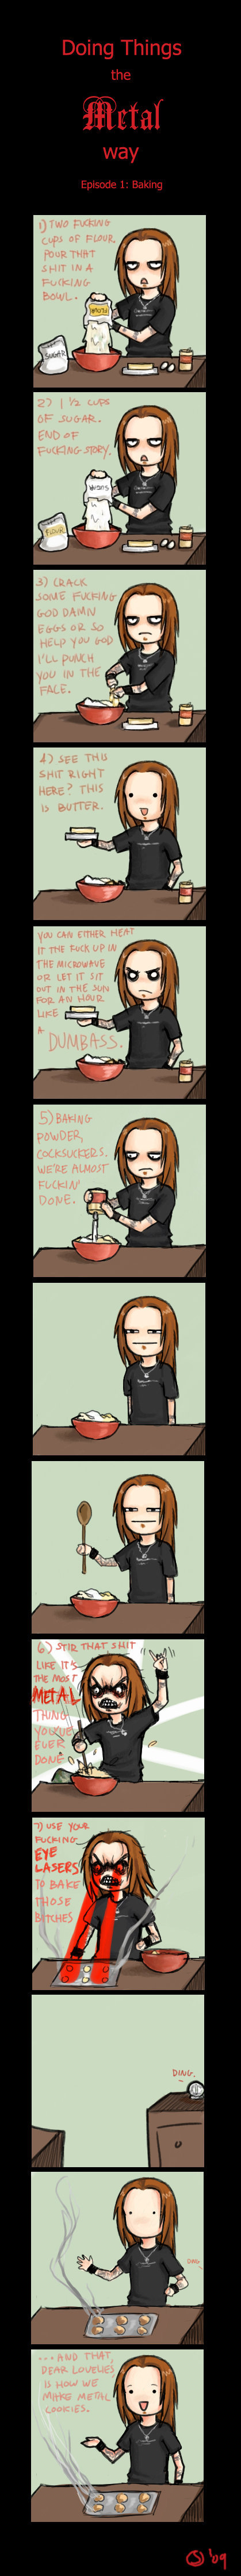 METAL BAKING. Not mine, found on deviantart awhile ago made by schellen, but they deleted their account awhile ago I'm pretty sure..... Alexi Laiho?